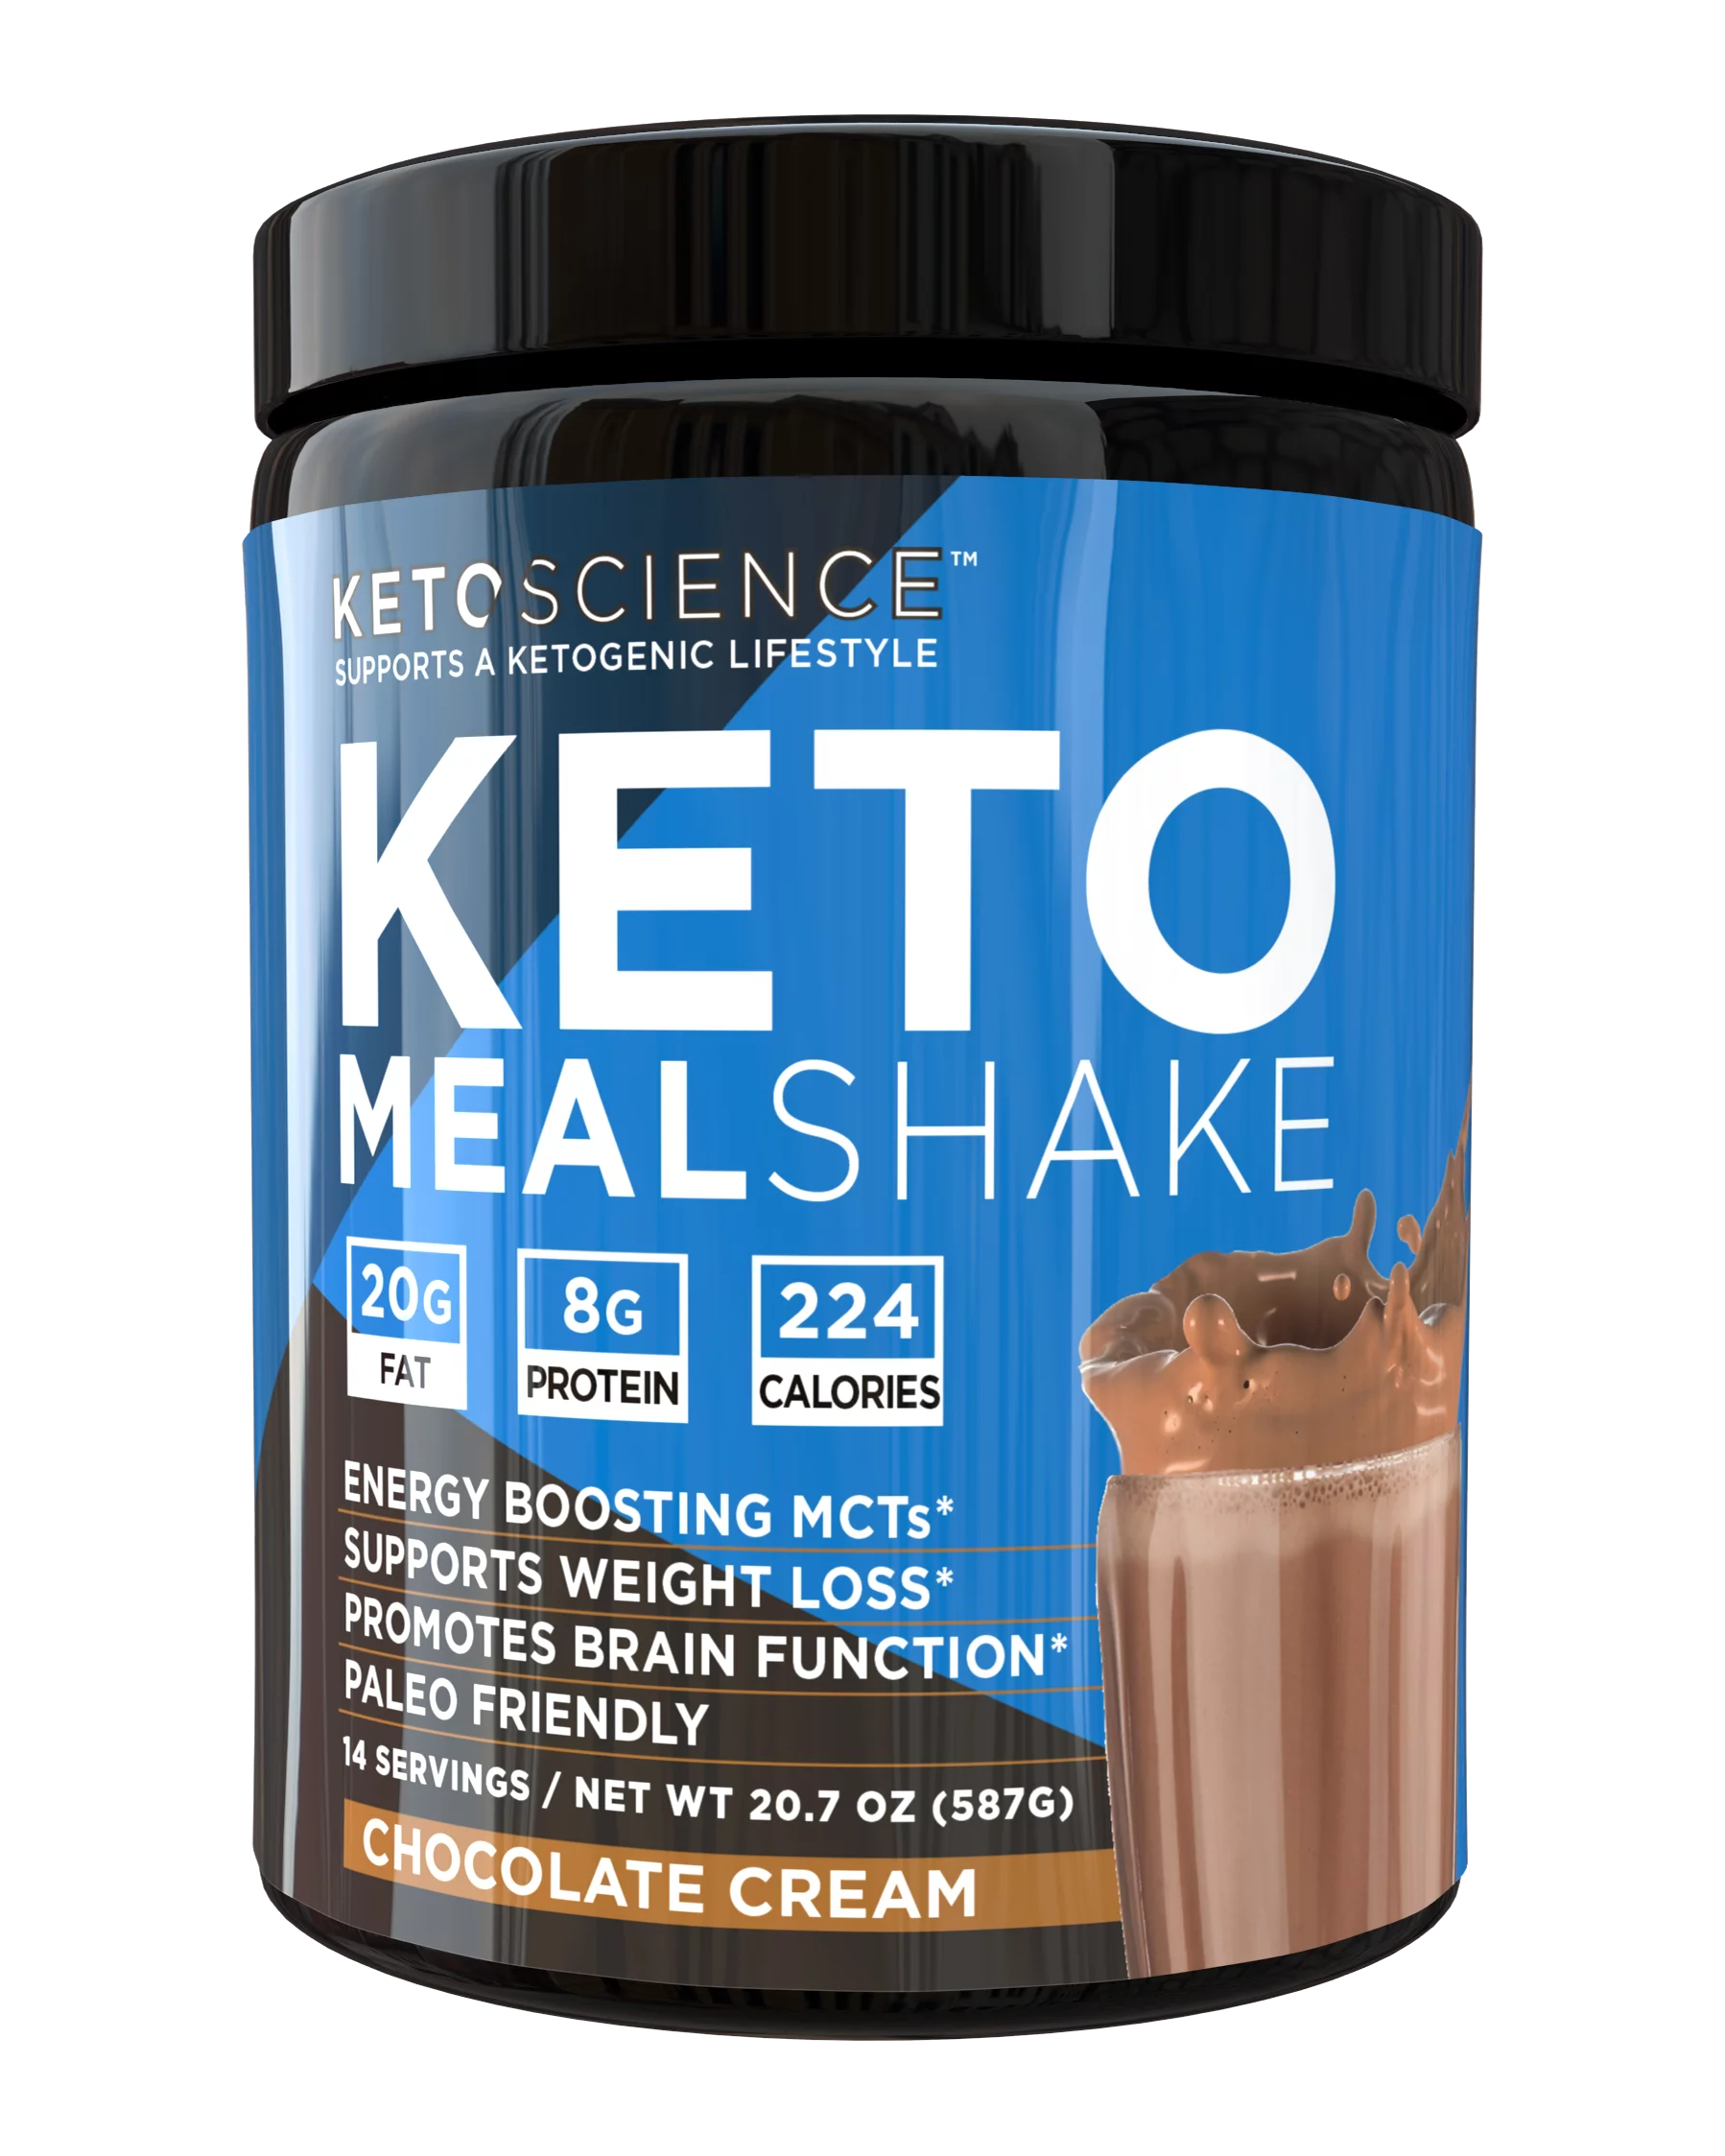 Keto Science Ketogenic Meal Shake Chocolate Dietary Supplement, Meal Replacement, Weight Loss, Intermittent Fasting, 20.7 oz. (587 g), 14 Servings